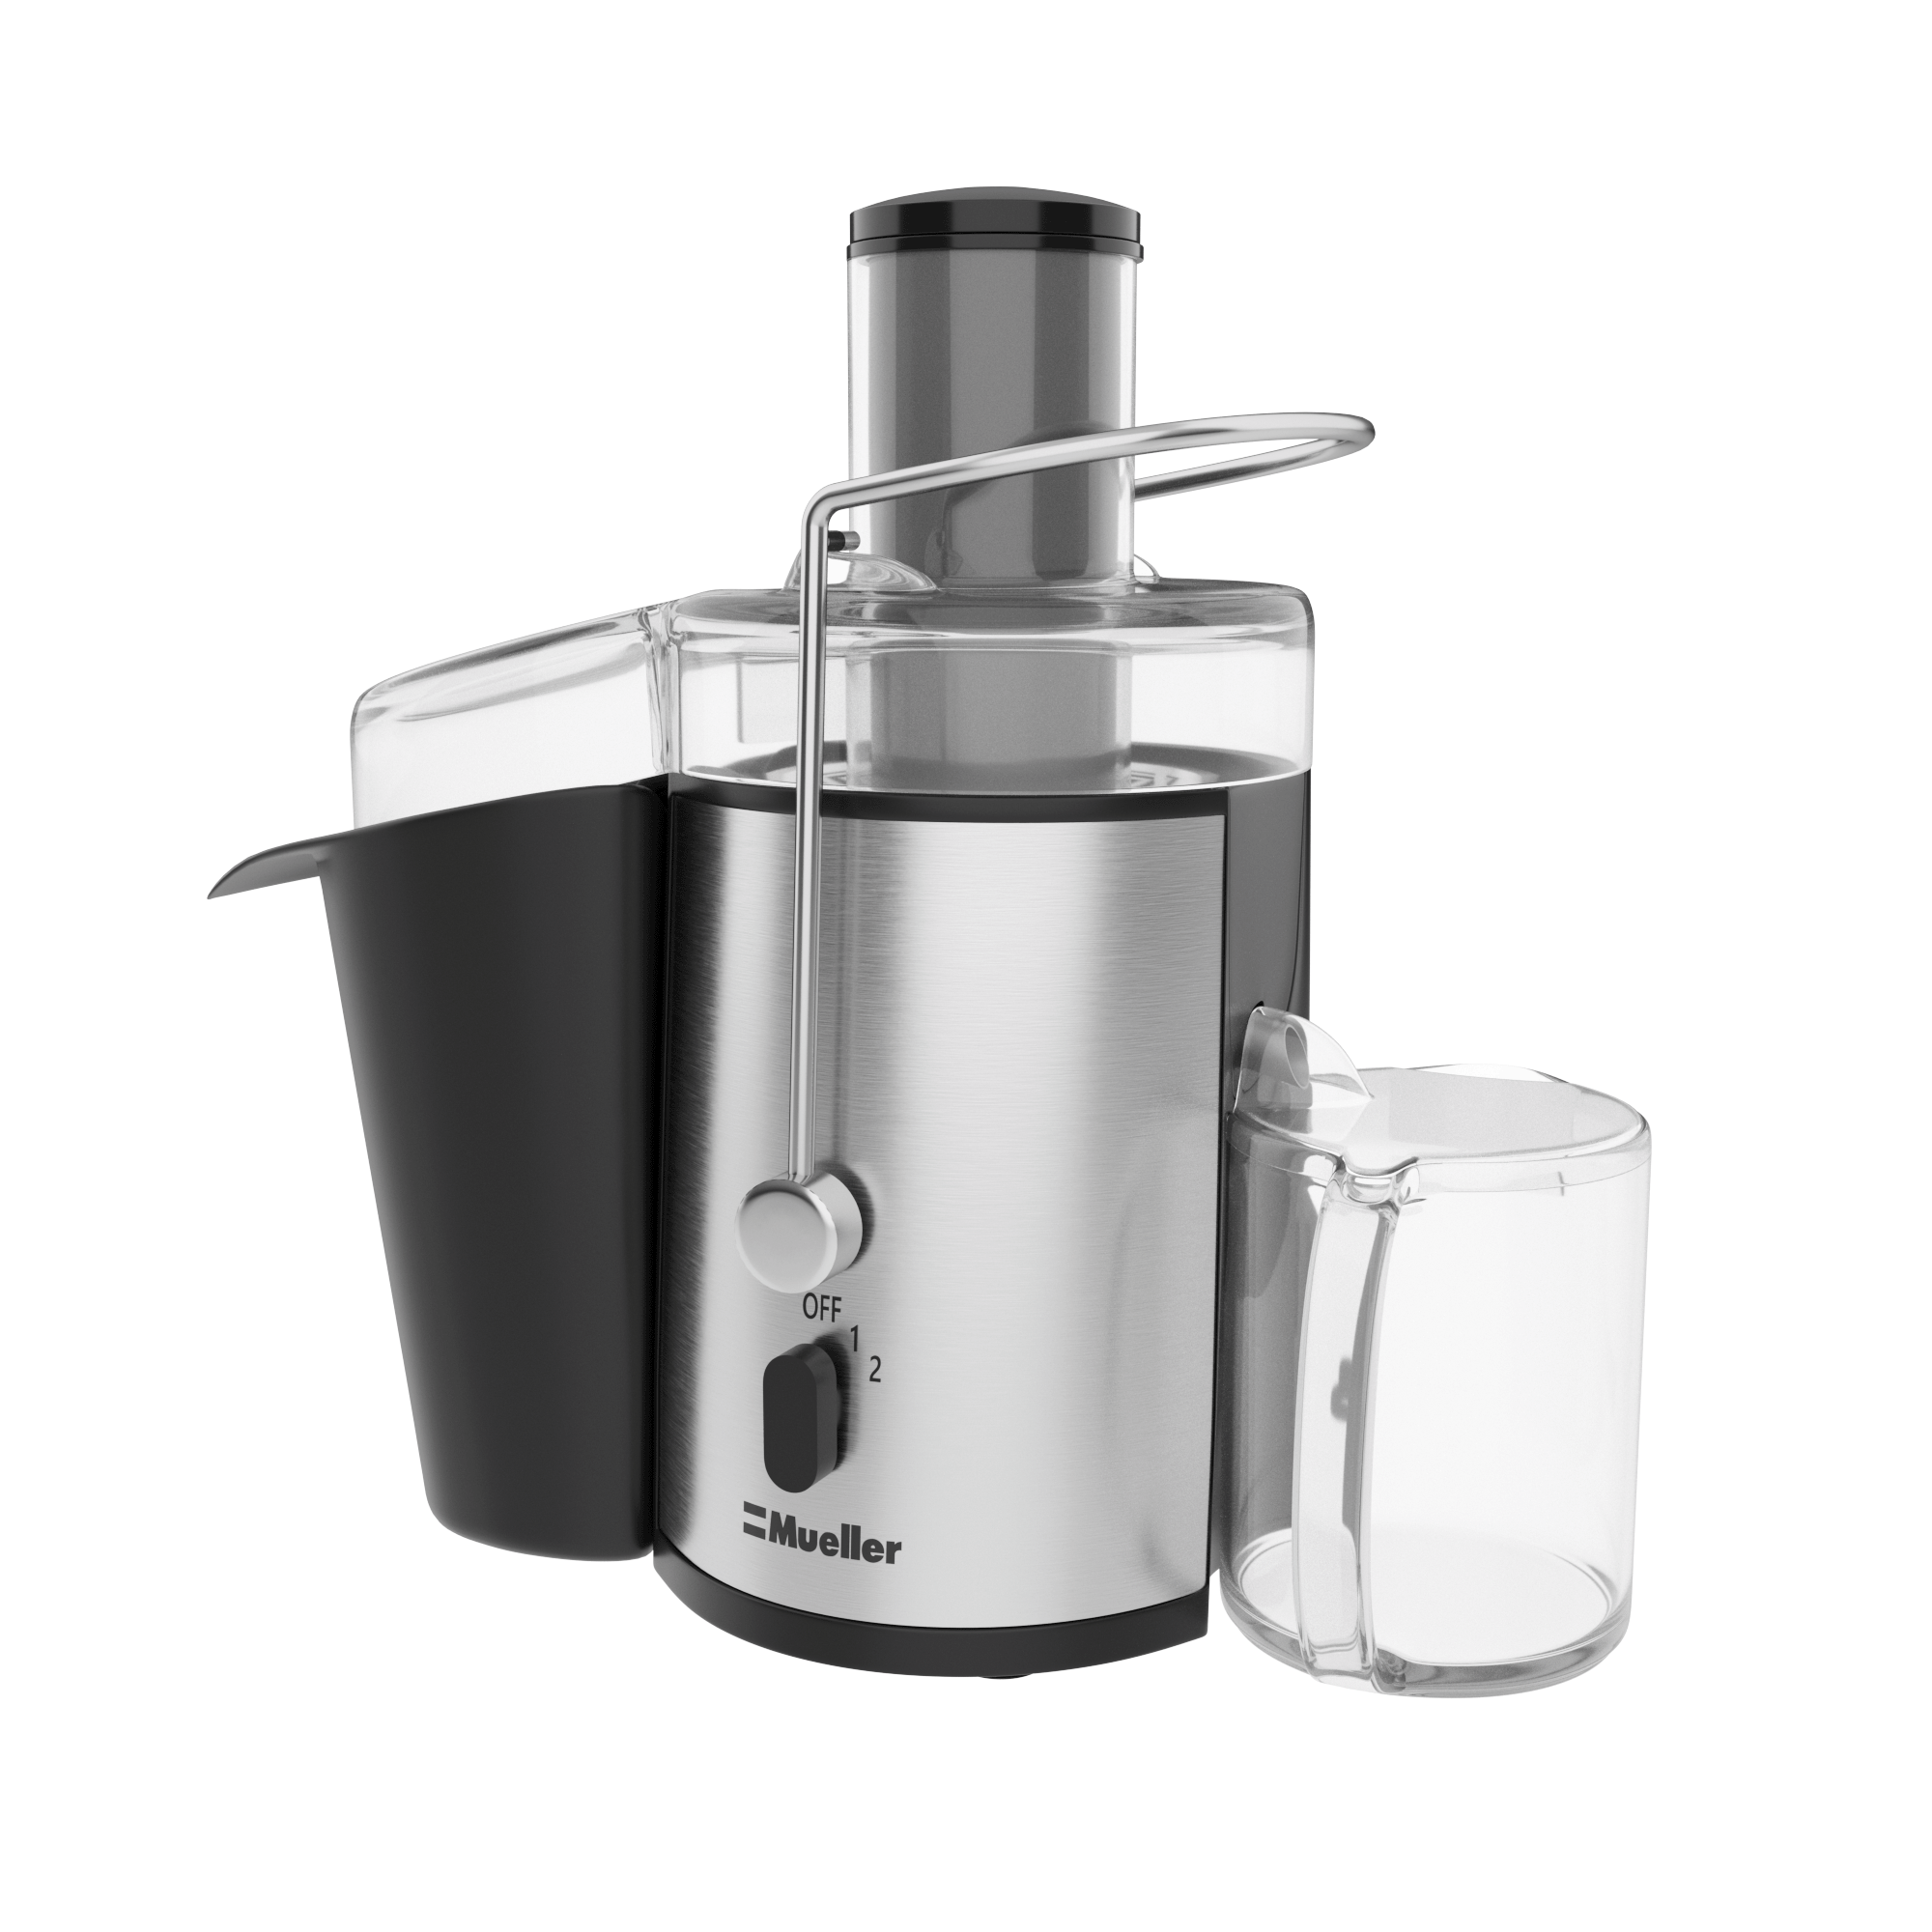 Sold at Auction: MUELLER AUSTRIA JUICER ULTRA POWER, EASY CLEAN